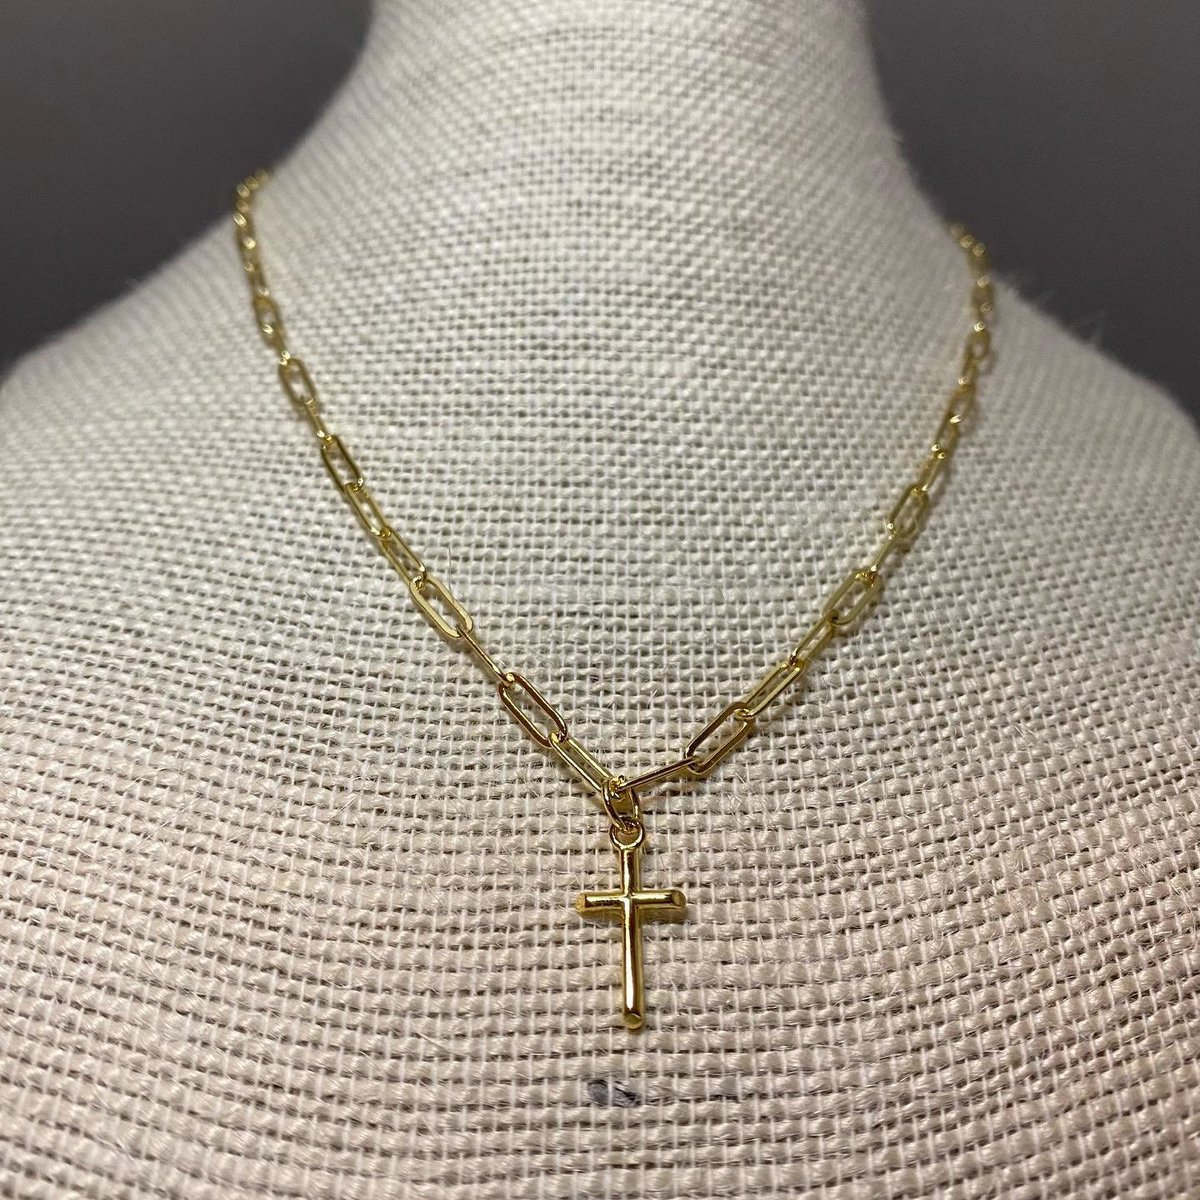 Excited to share the latest addition to my #etsy shop: 24k Gold Filled Paperclip Chain Necklace with 18k Gold Filled Cross Charm etsy.me/46WeCag #gold #cross #religious #men #24kgold #24kgoldfilled #paperclipchain #paperclipnecklace #18kgoldfilled #love2jewelry